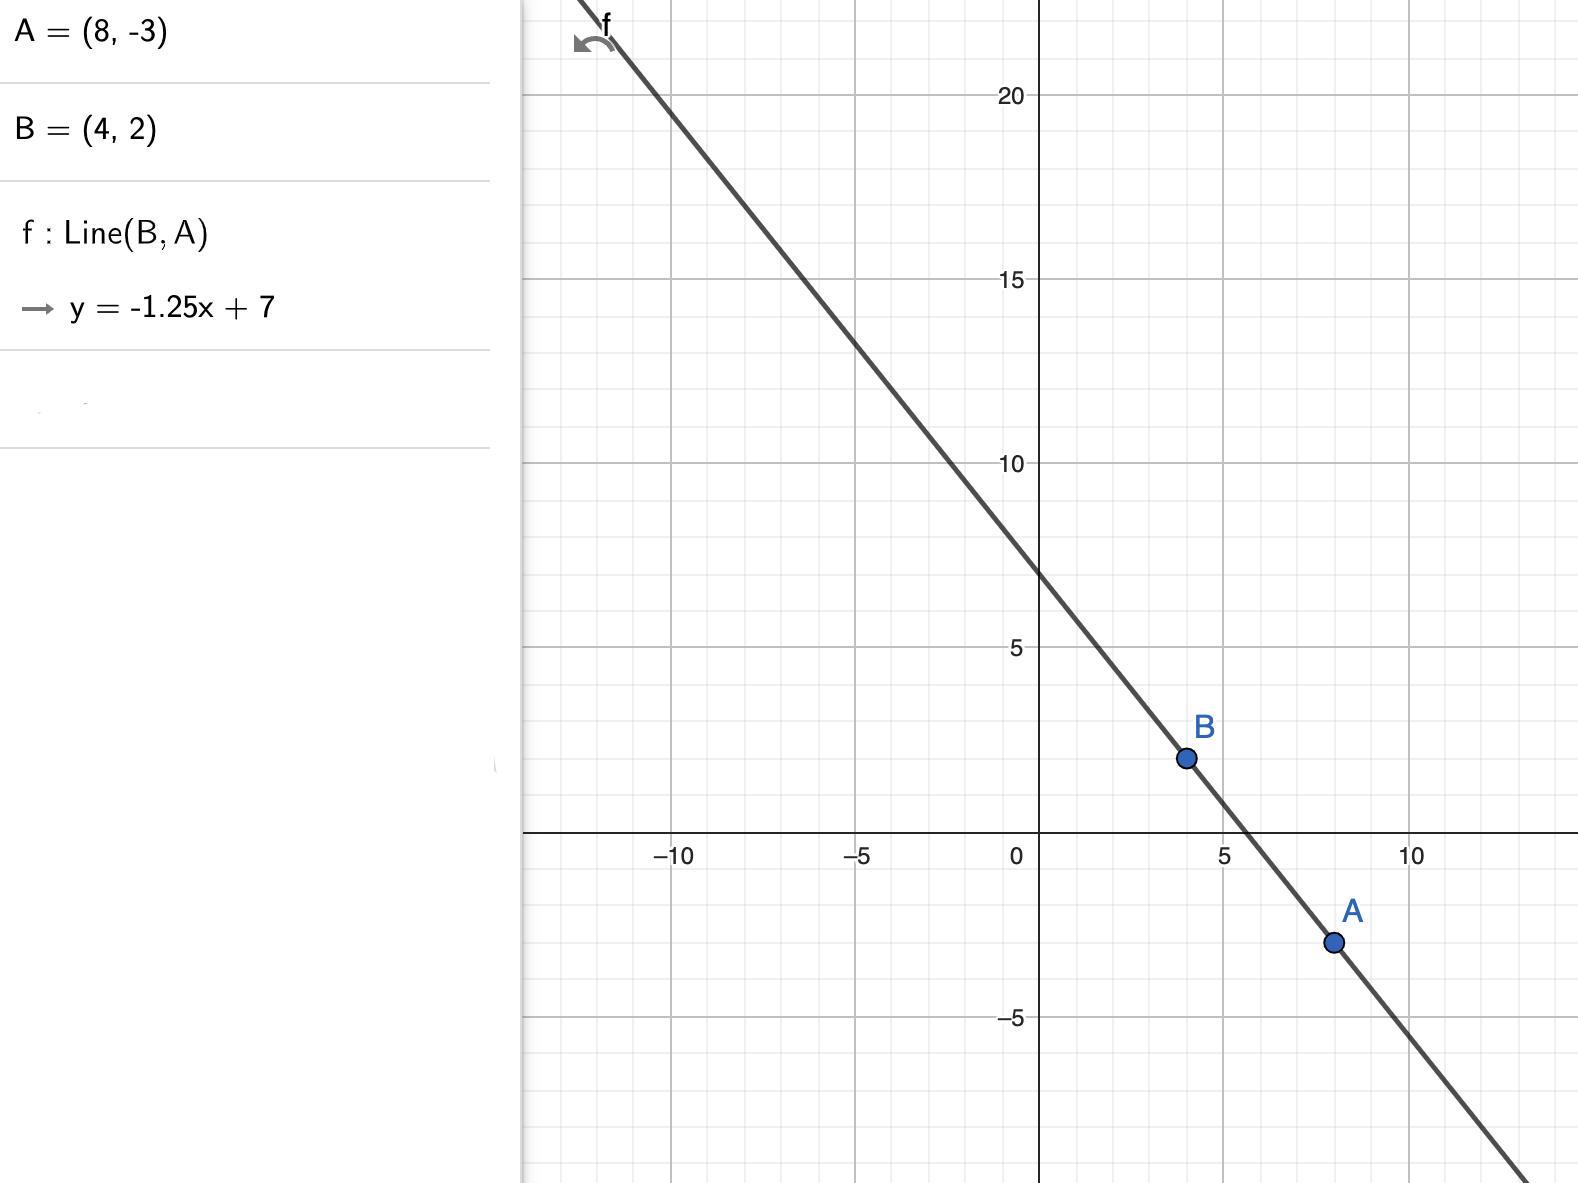 What Is An Equation Of The Line That Passes Through The Points (8,-3) And (4,2)?